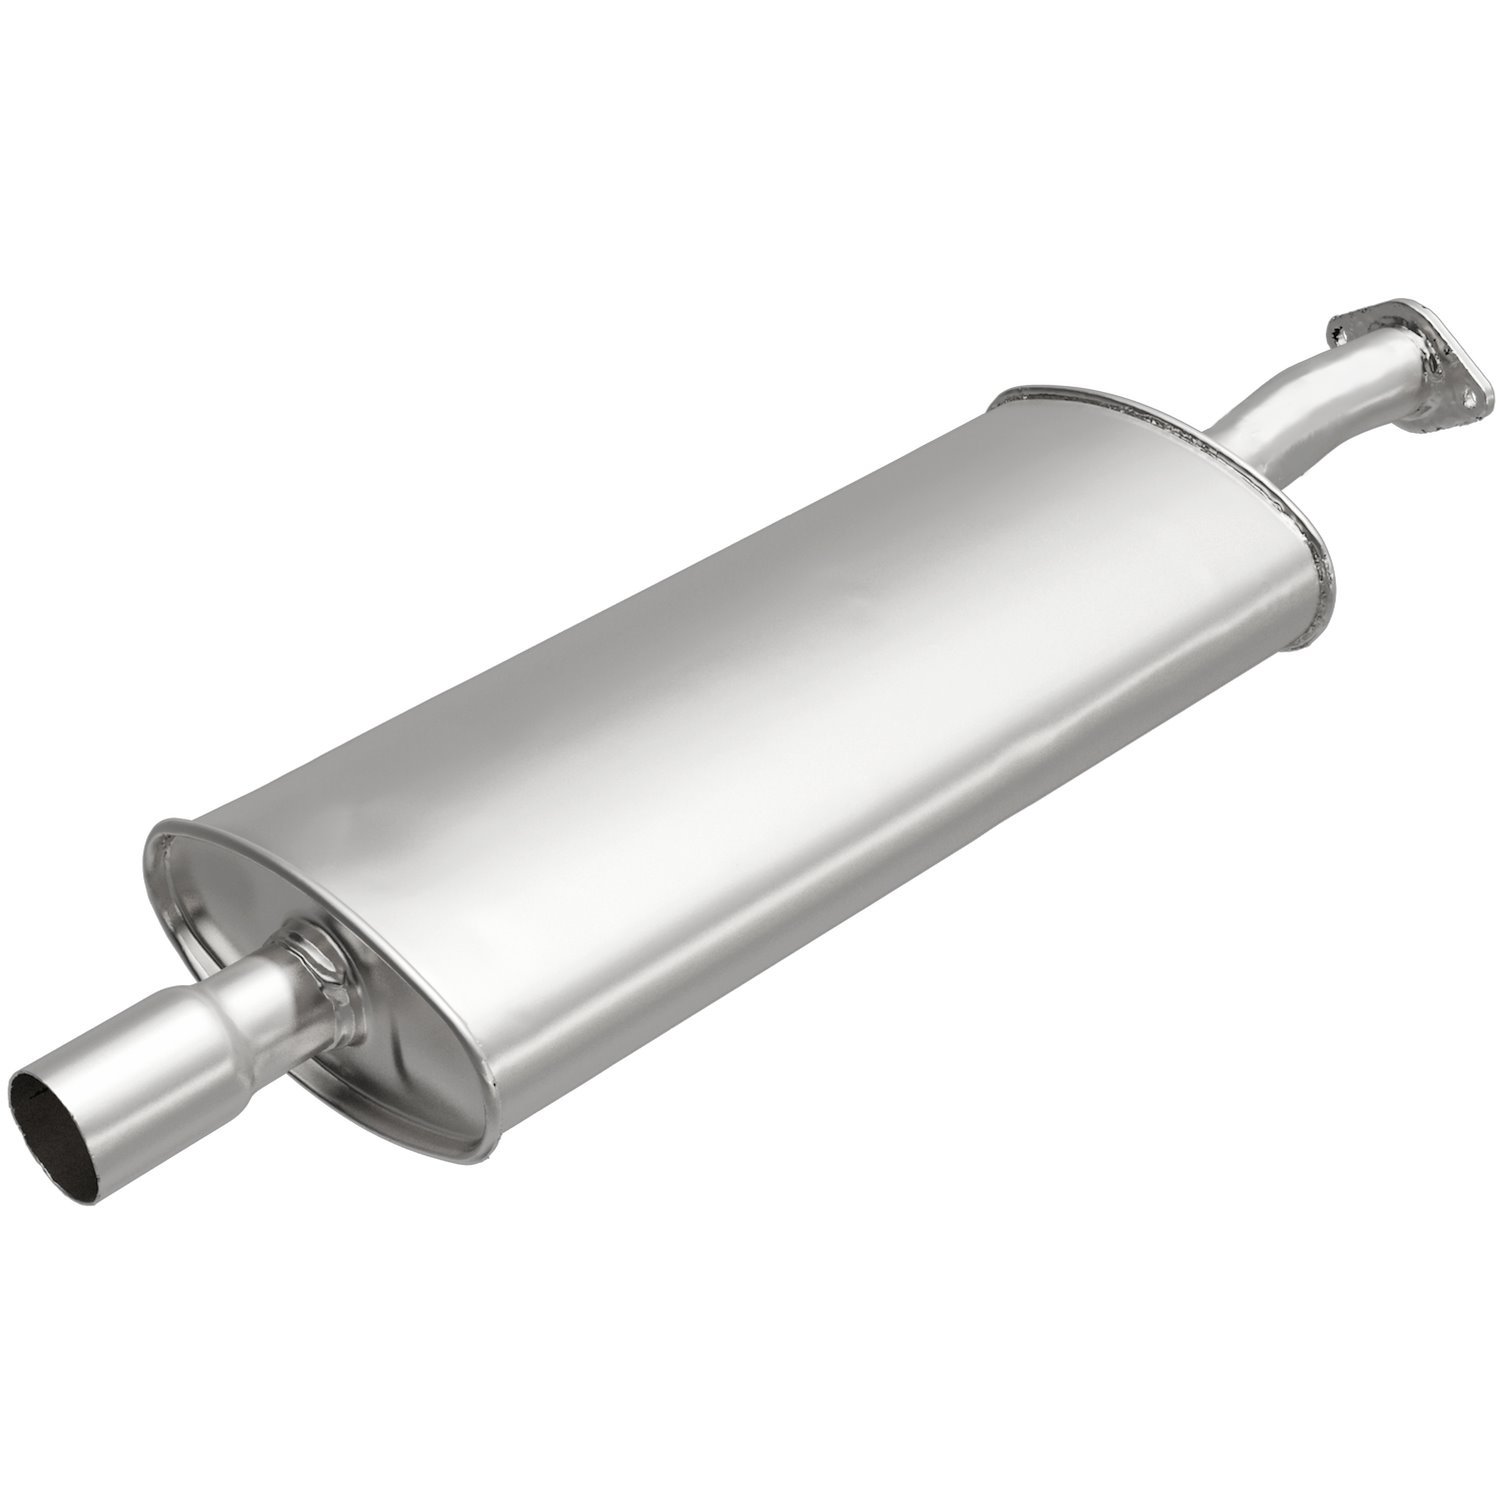 Direct-Fit Exhaust Muffler, 2005-2008 Ford Escape, Mercury